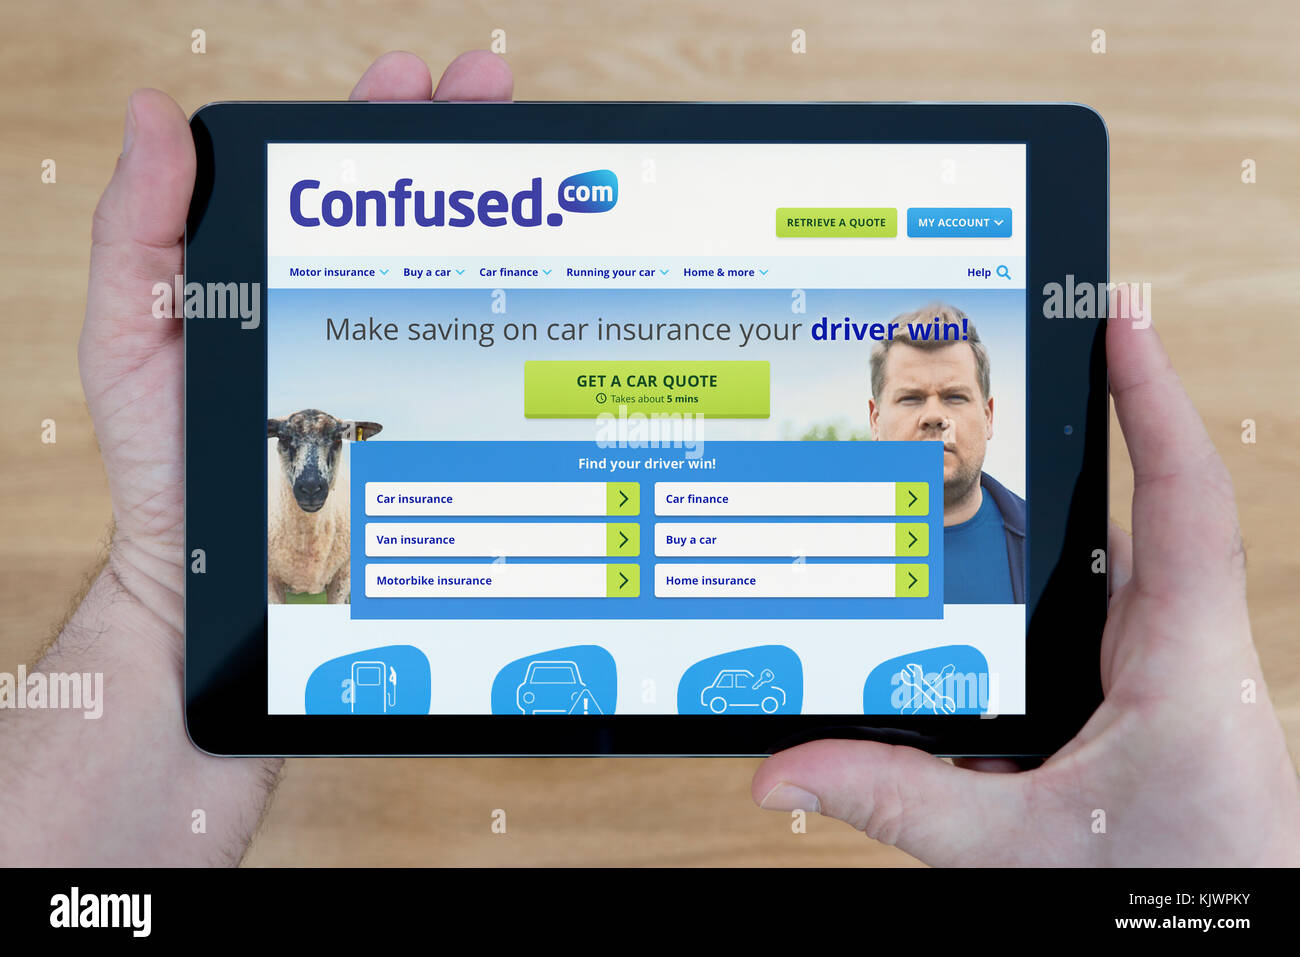 A man looks at the confused.com website on his iPad tablet device, shot against a wooden table top background (Editorial use only) Stock Photo